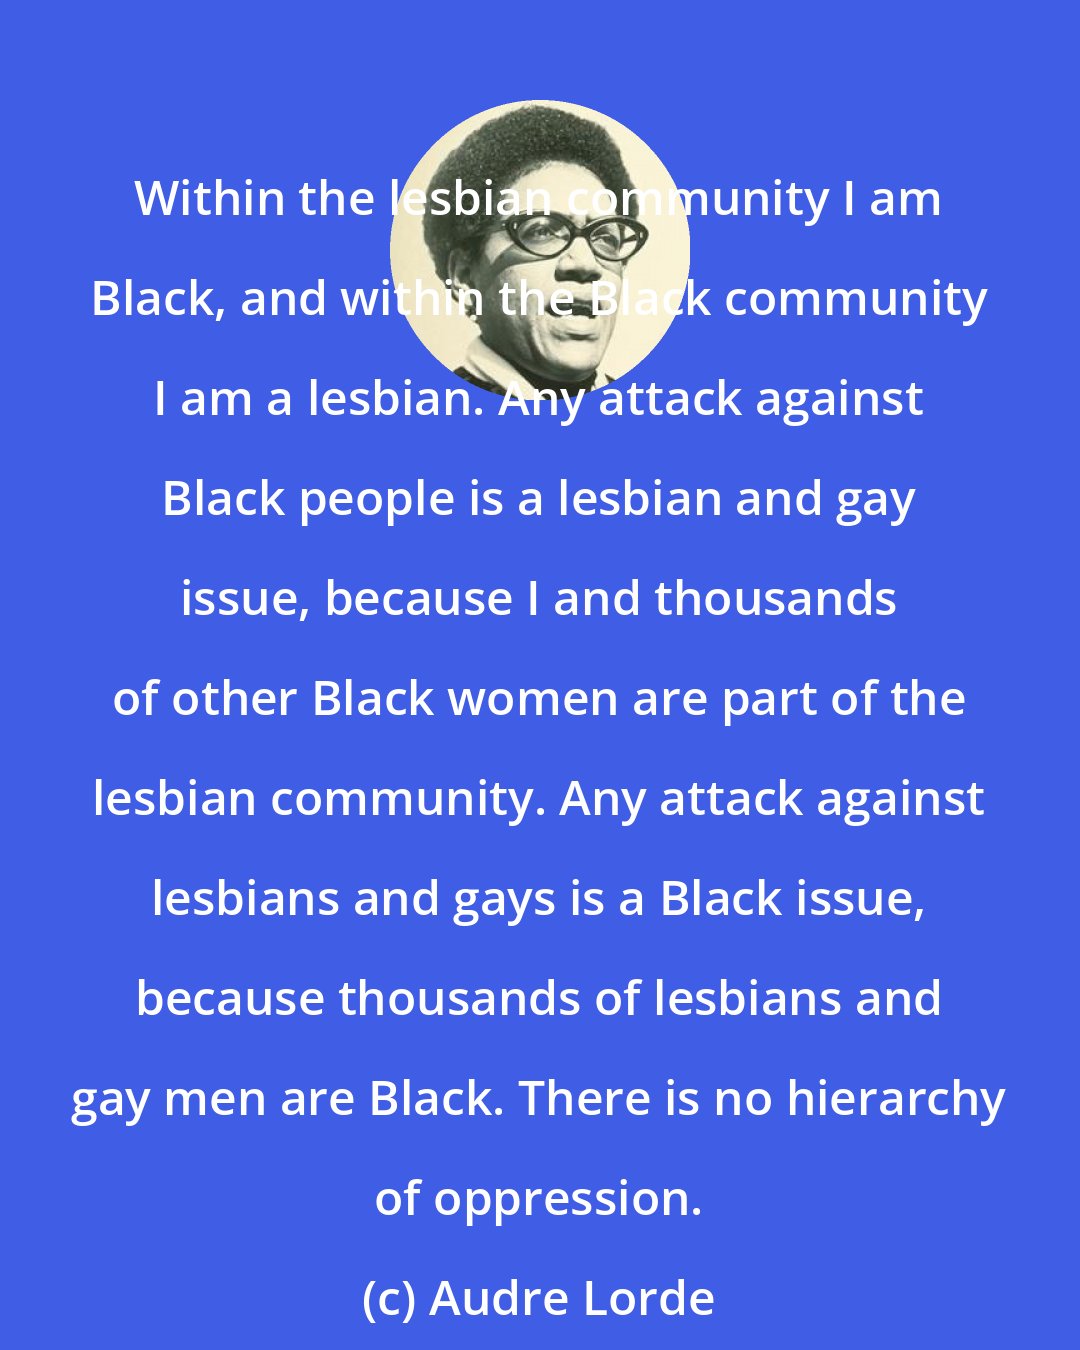 Audre Lorde: Within the lesbian community I am Black, and within the Black community I am a lesbian. Any attack against Black people is a lesbian and gay issue, because I and thousands of other Black women are part of the lesbian community. Any attack against lesbians and gays is a Black issue, because thousands of lesbians and gay men are Black. There is no hierarchy of oppression.